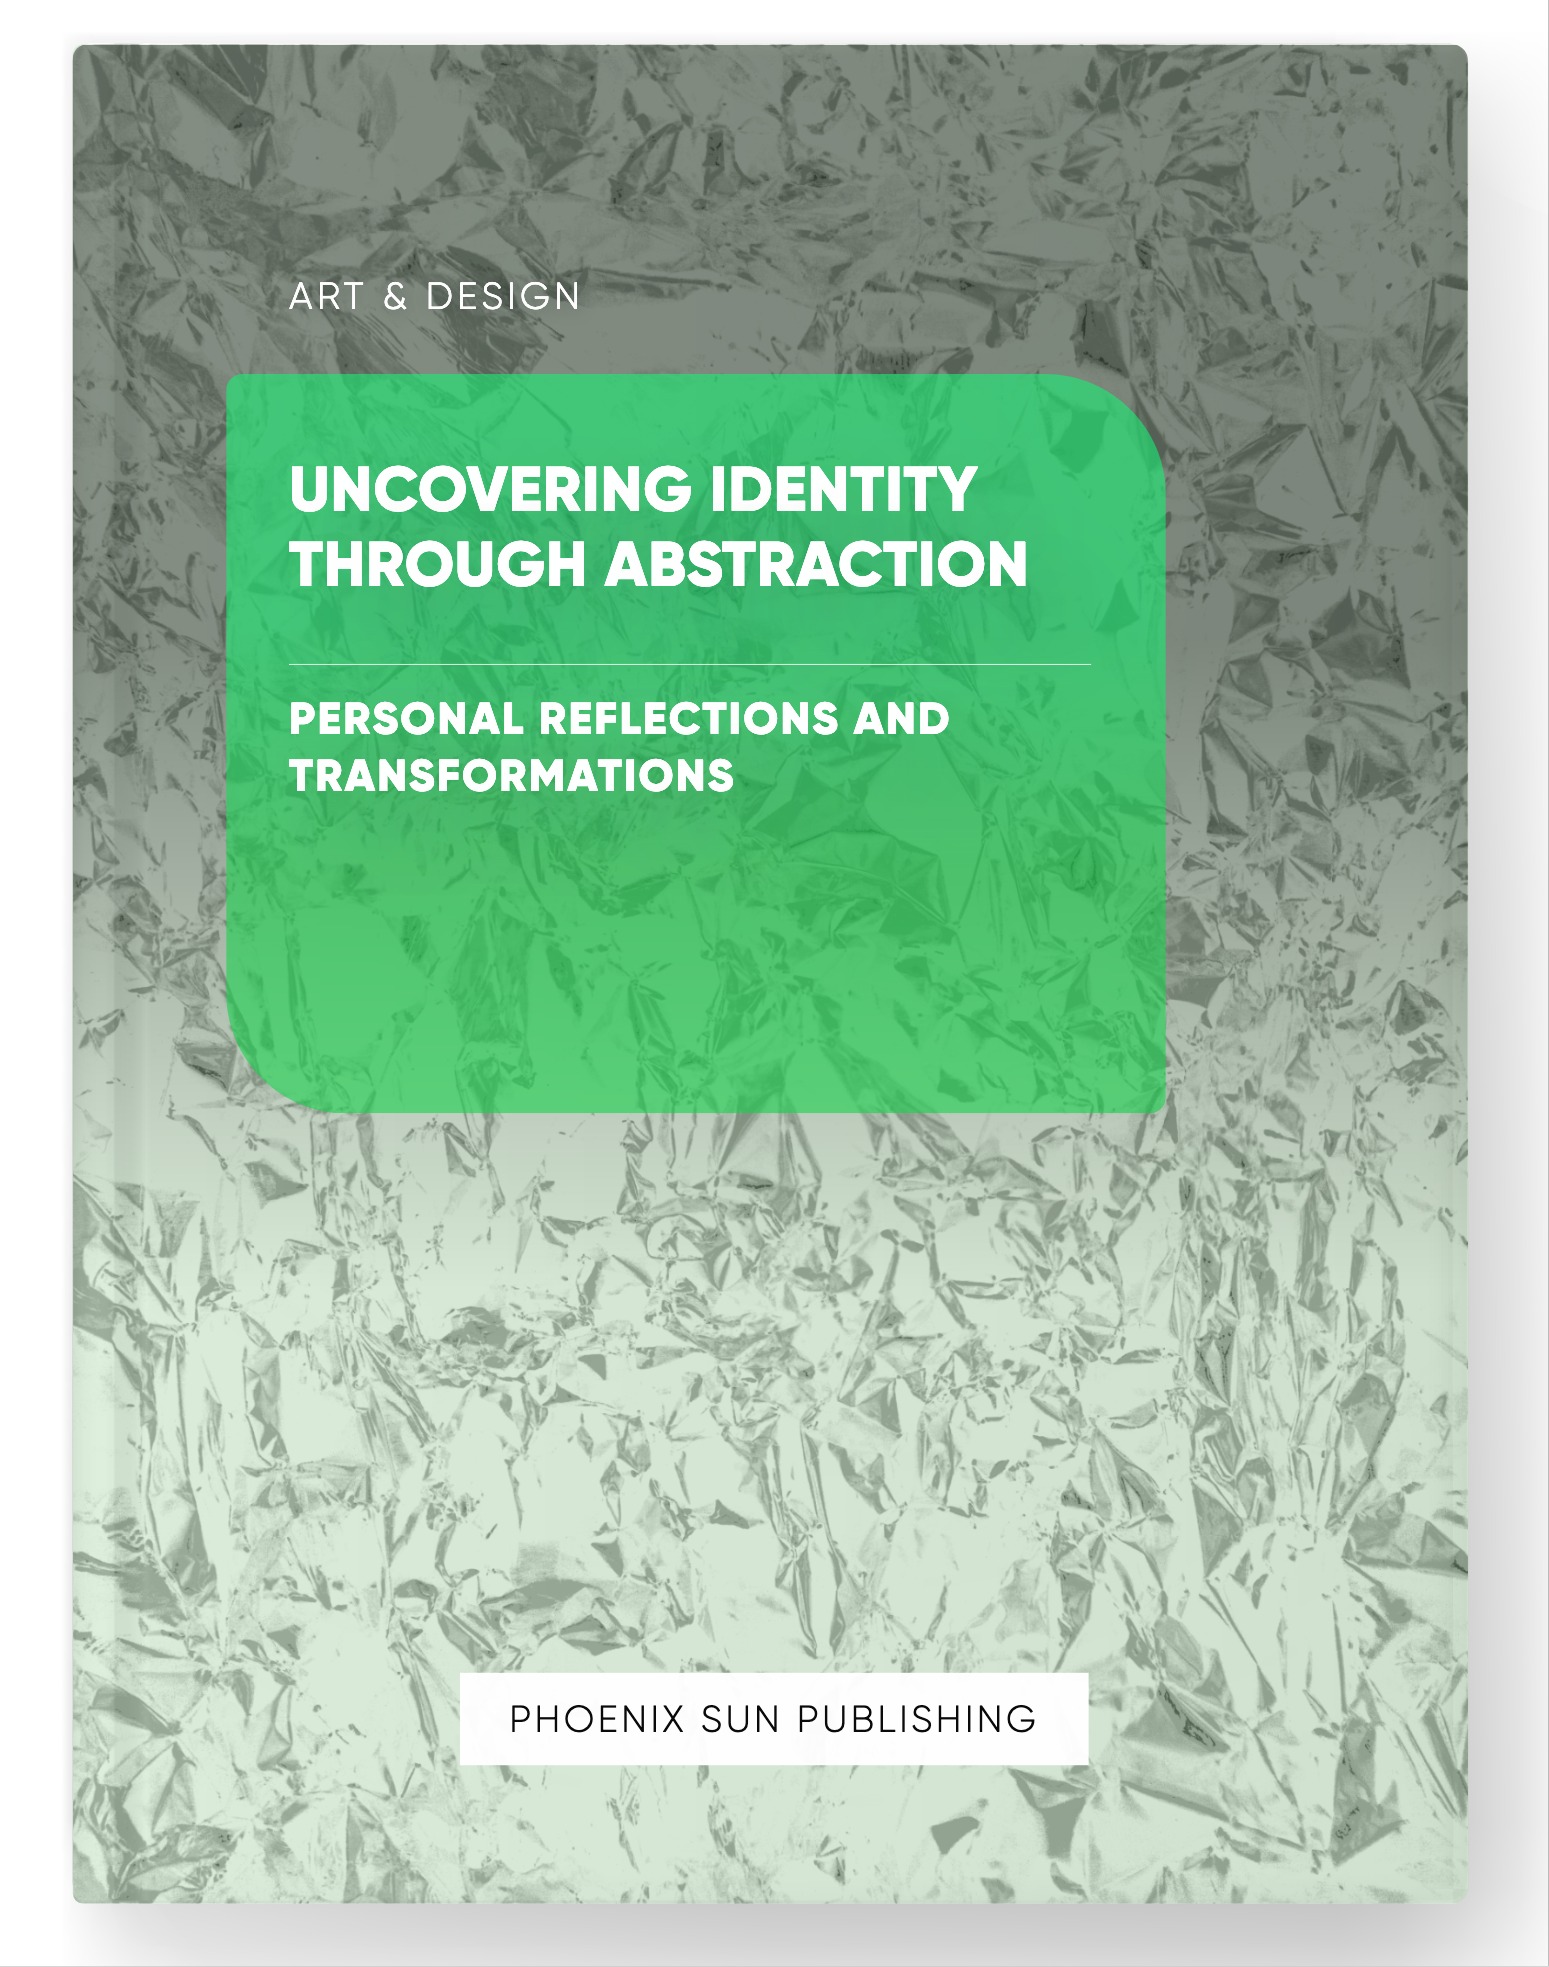 Uncovering Identity through Abstraction – Personal Reflections and Transformations